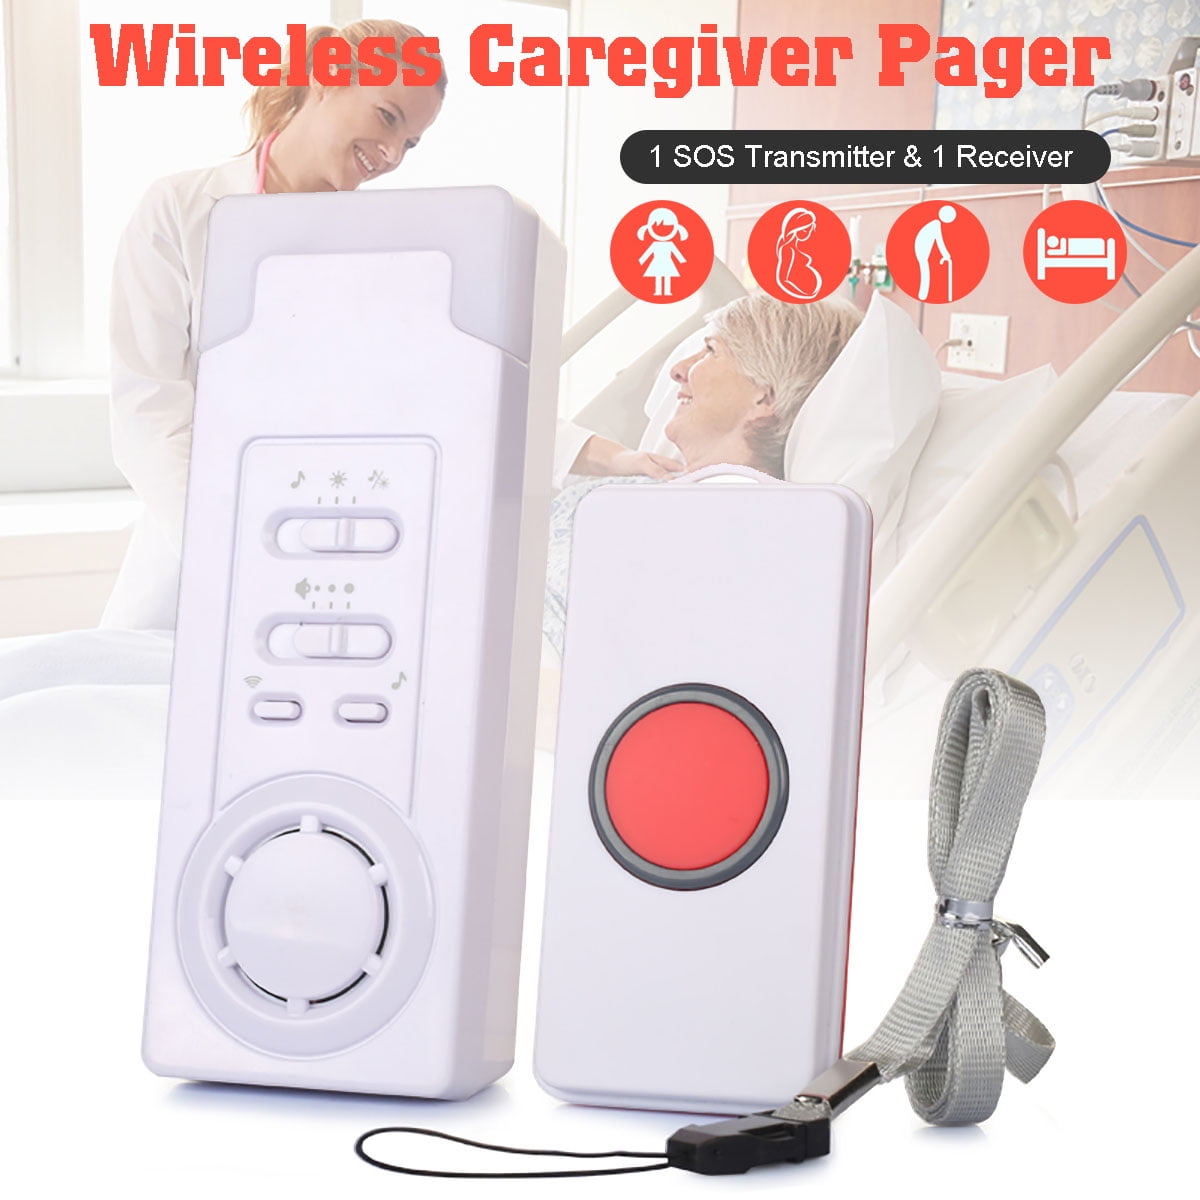 Housecare Wireless Caregiver Pager Call Button Personal Help Alert Pager System for Home Nurses Caregivers Patients Elderly 2 Waterproof Transmitters 2 Plugin Receivers 2 receivers 